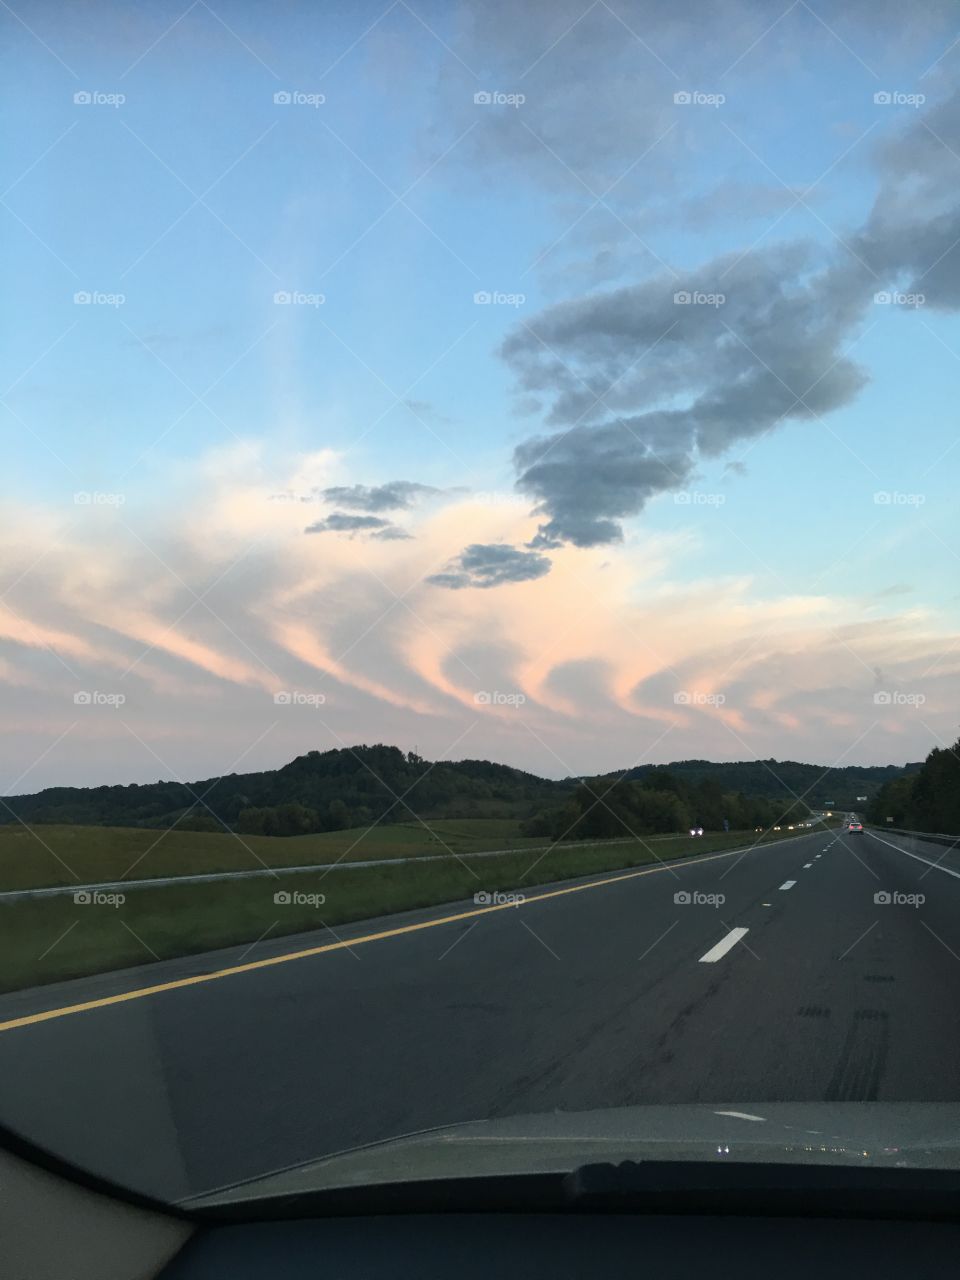 Amazing clouds 